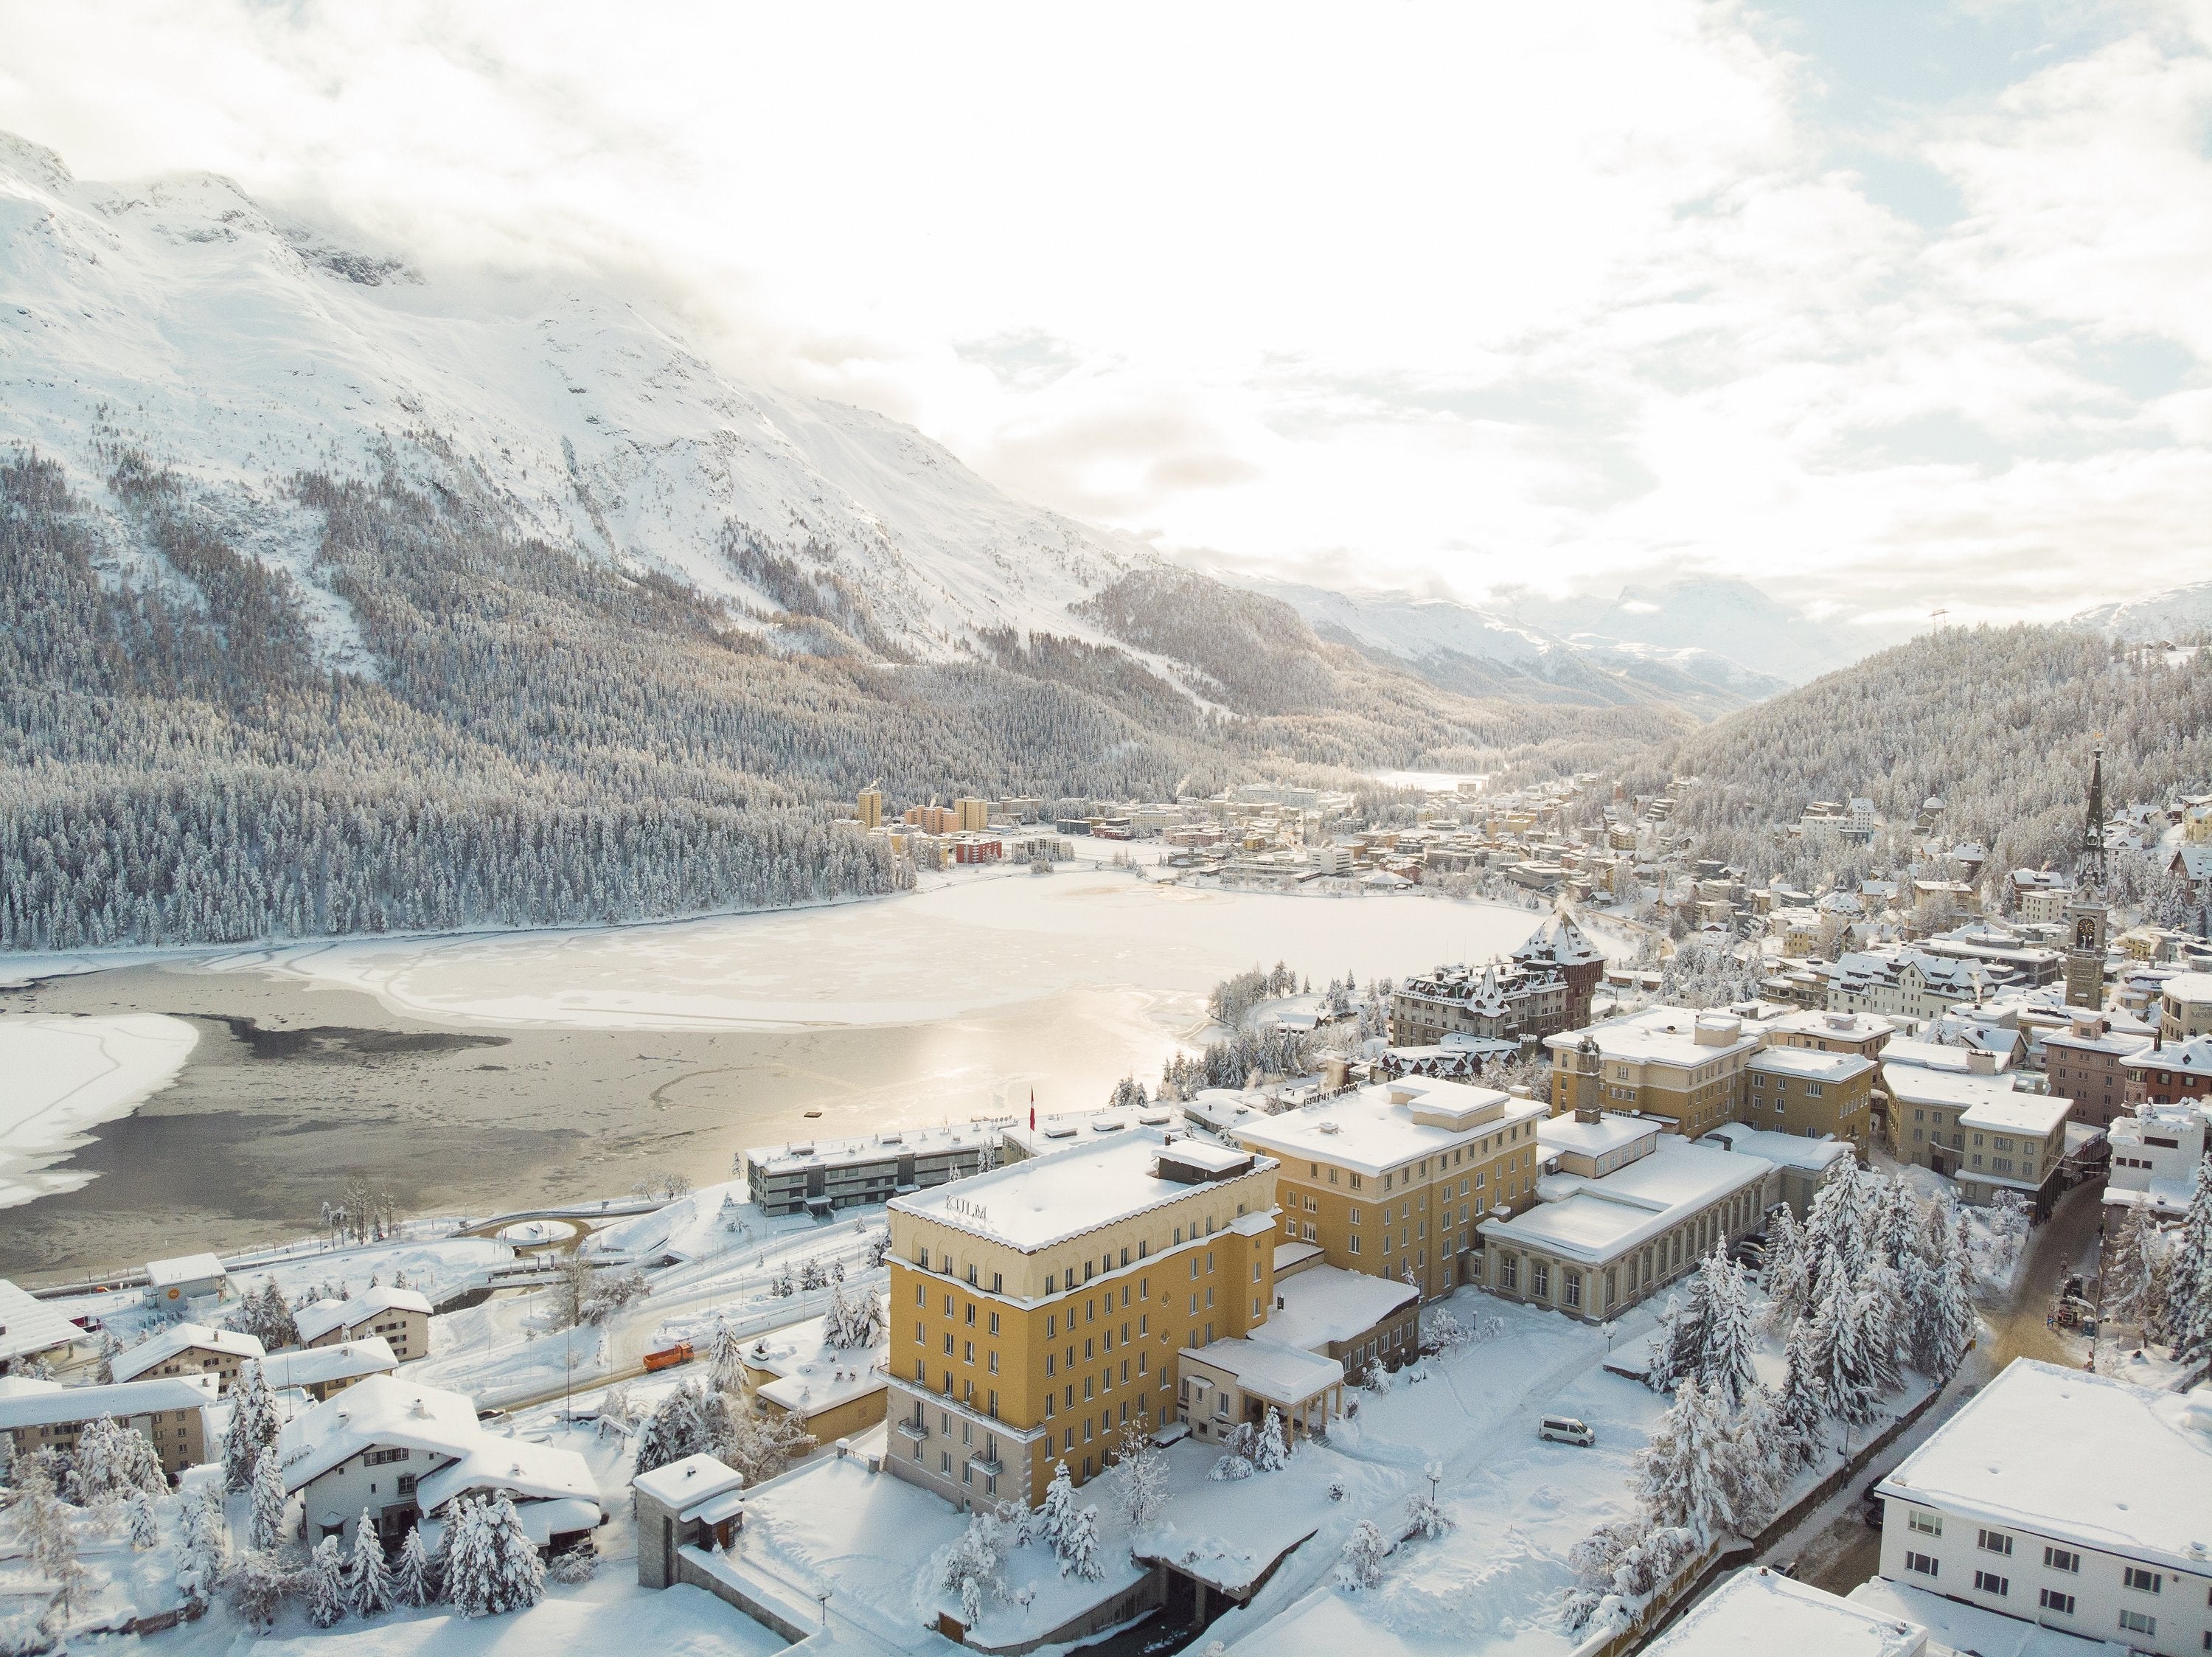 The stunning setting of Kulm Hotel, the first hotel built in St Moritz